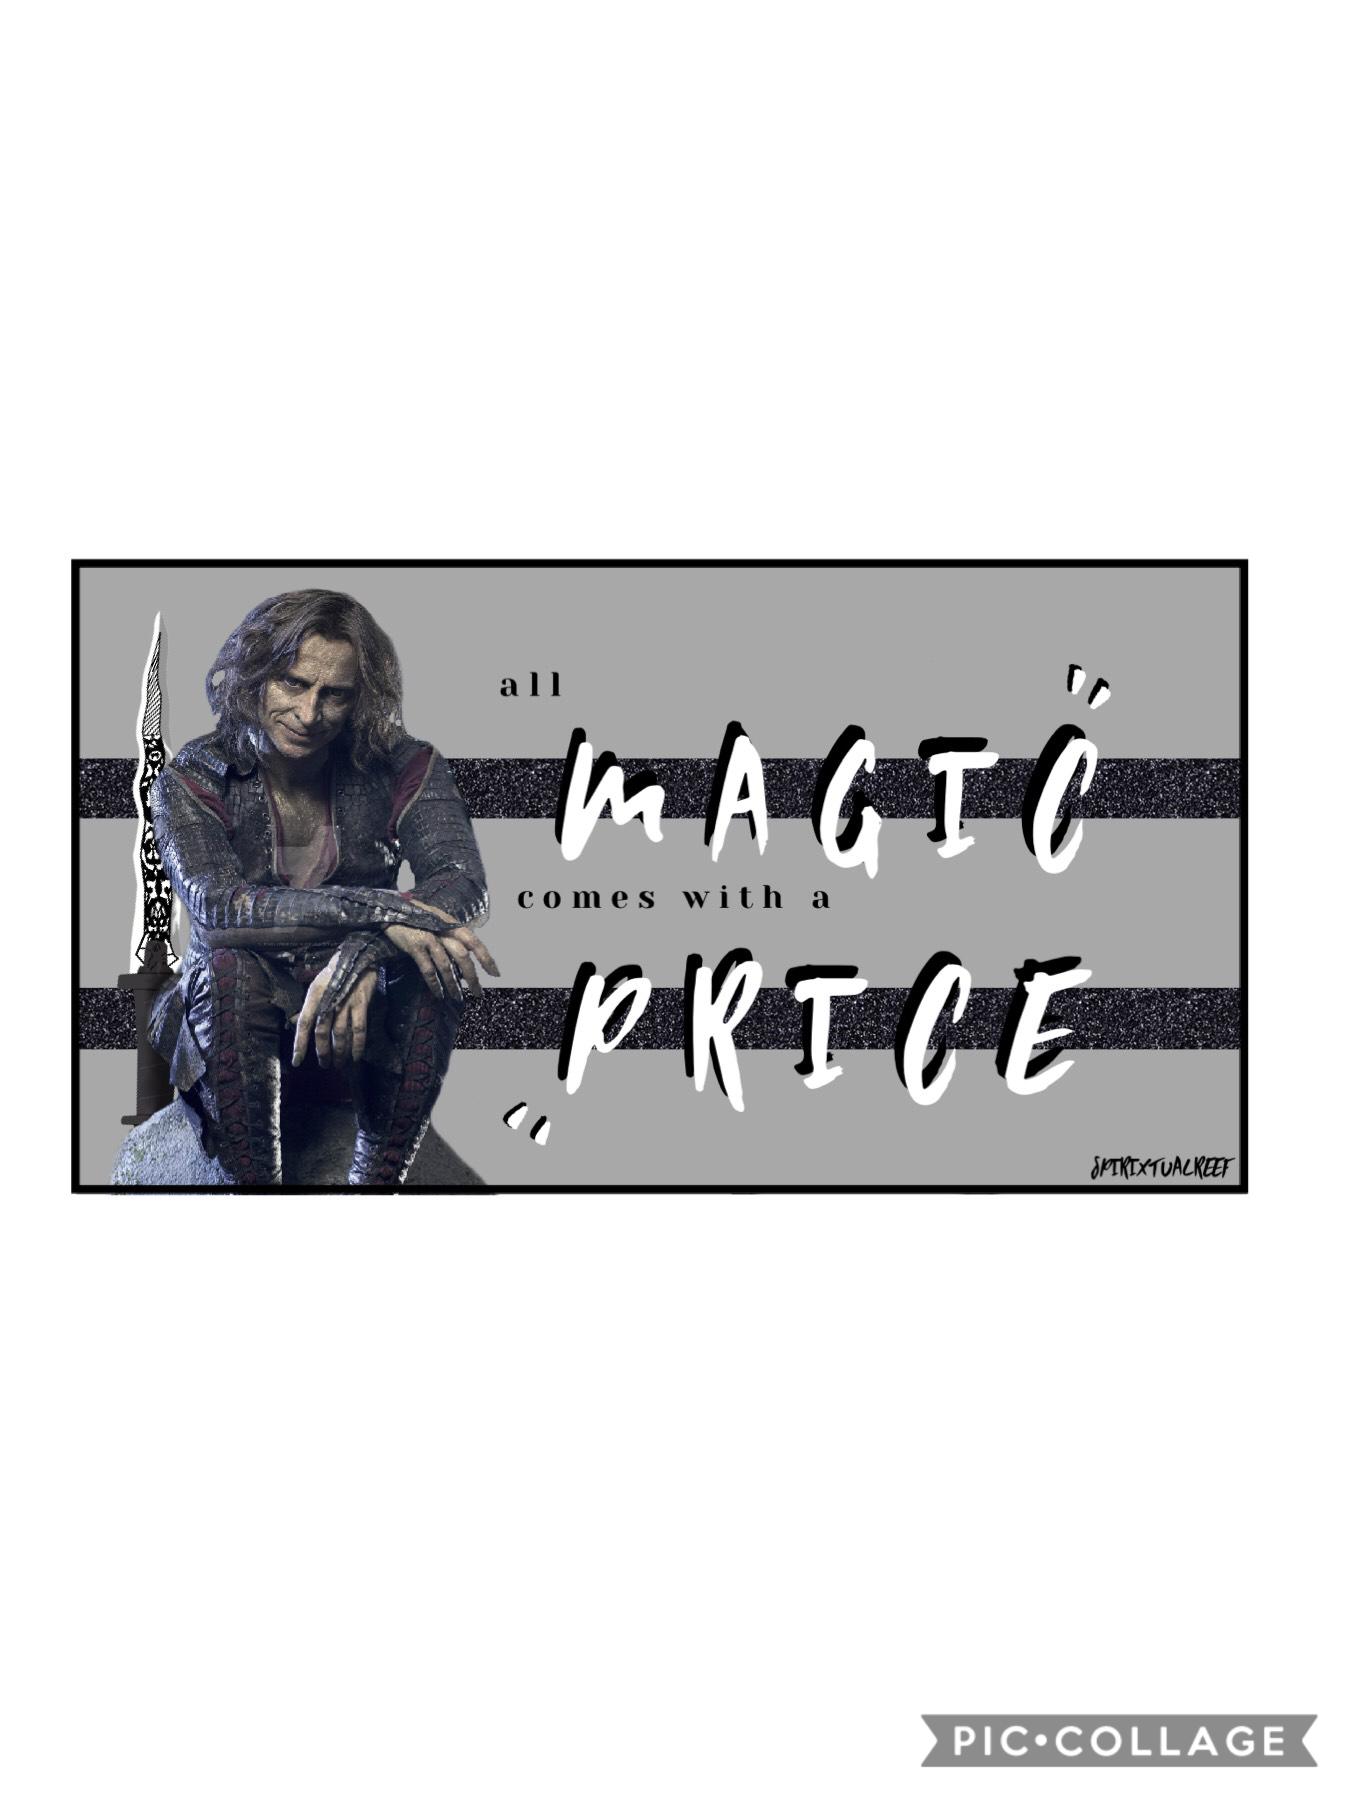 The new fonts are really cool 👌. Been rewatching Once Upon A Time with the intention of finishing it this time and my favourite character is still Rumple/Mr Gold. I think I like villains lol.